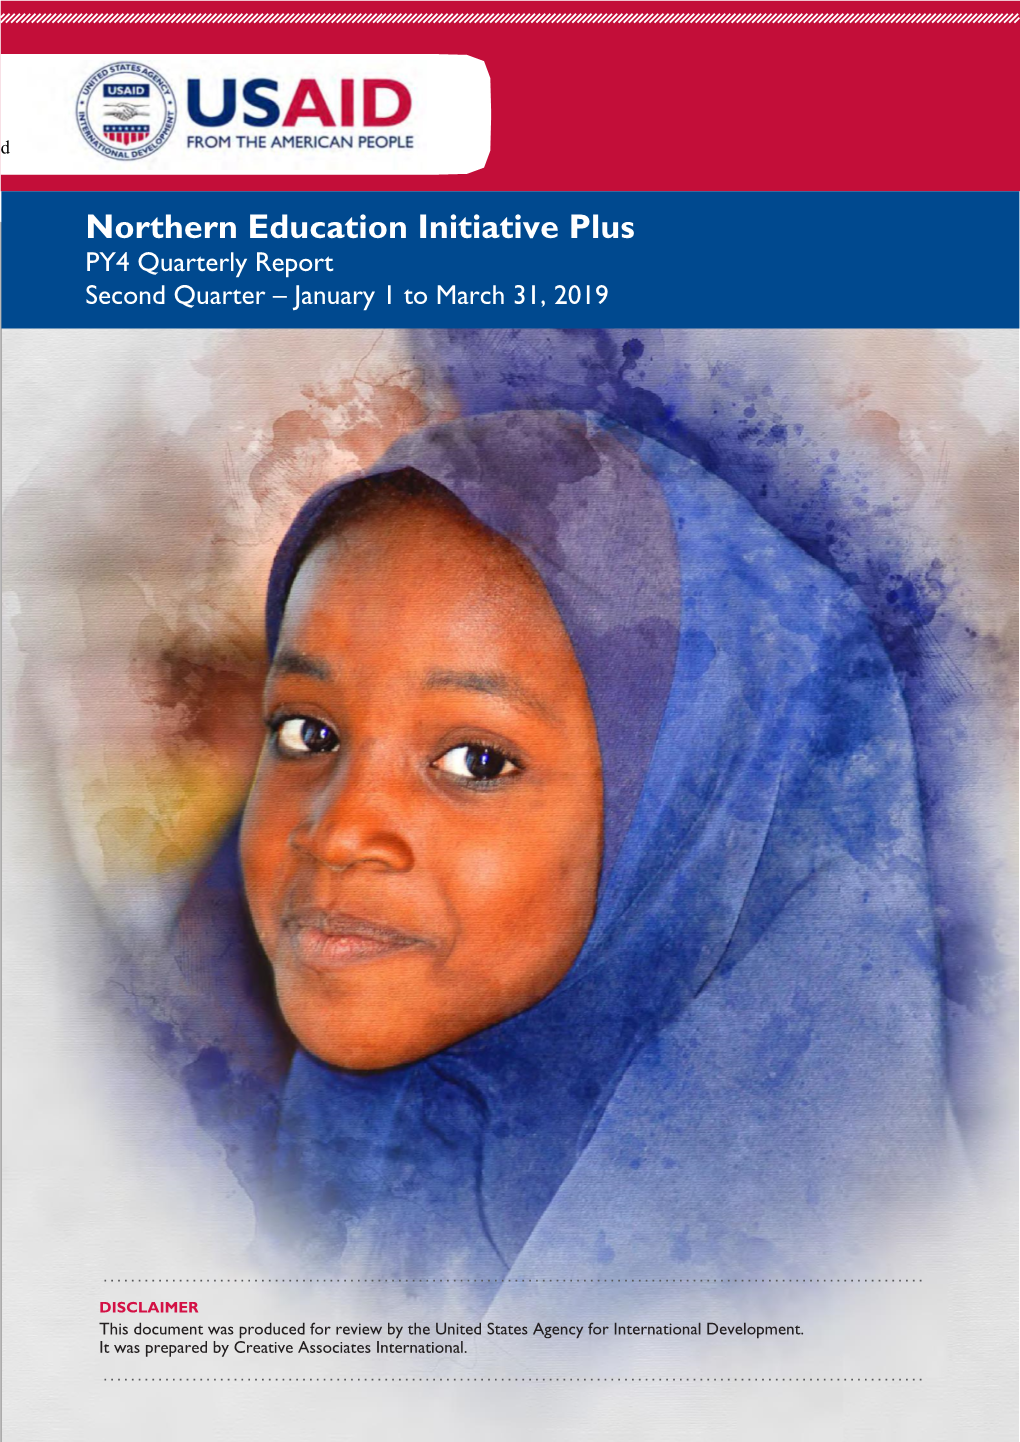 Northern Education Initiative Plus PY4 Quarterly Report Second Quarter – January 1 to March 31, 2019